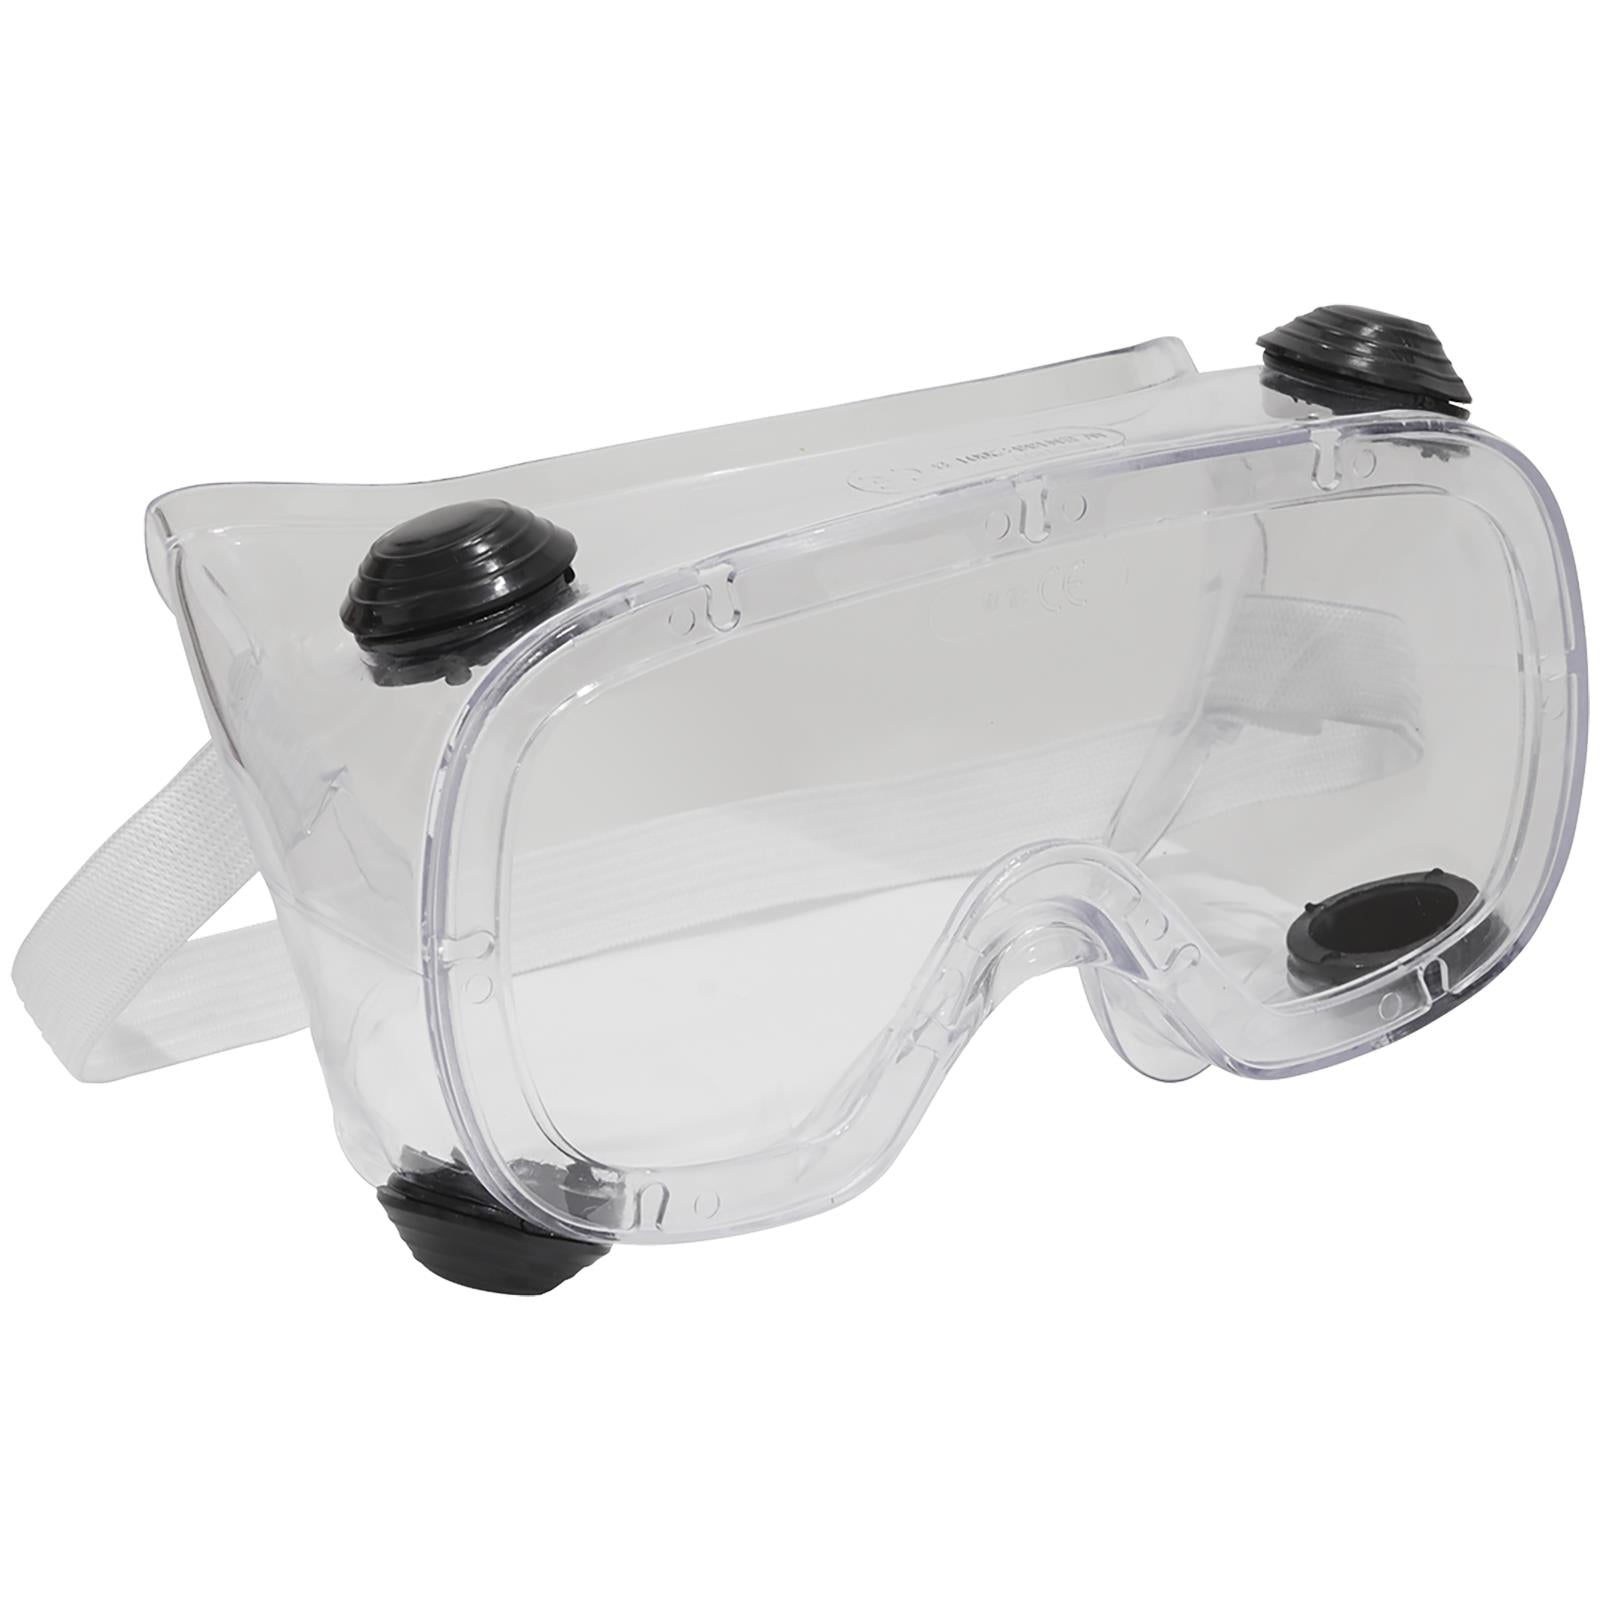 Worksafe by Sealey Standard Goggles Indirect Vent Impact Resistant